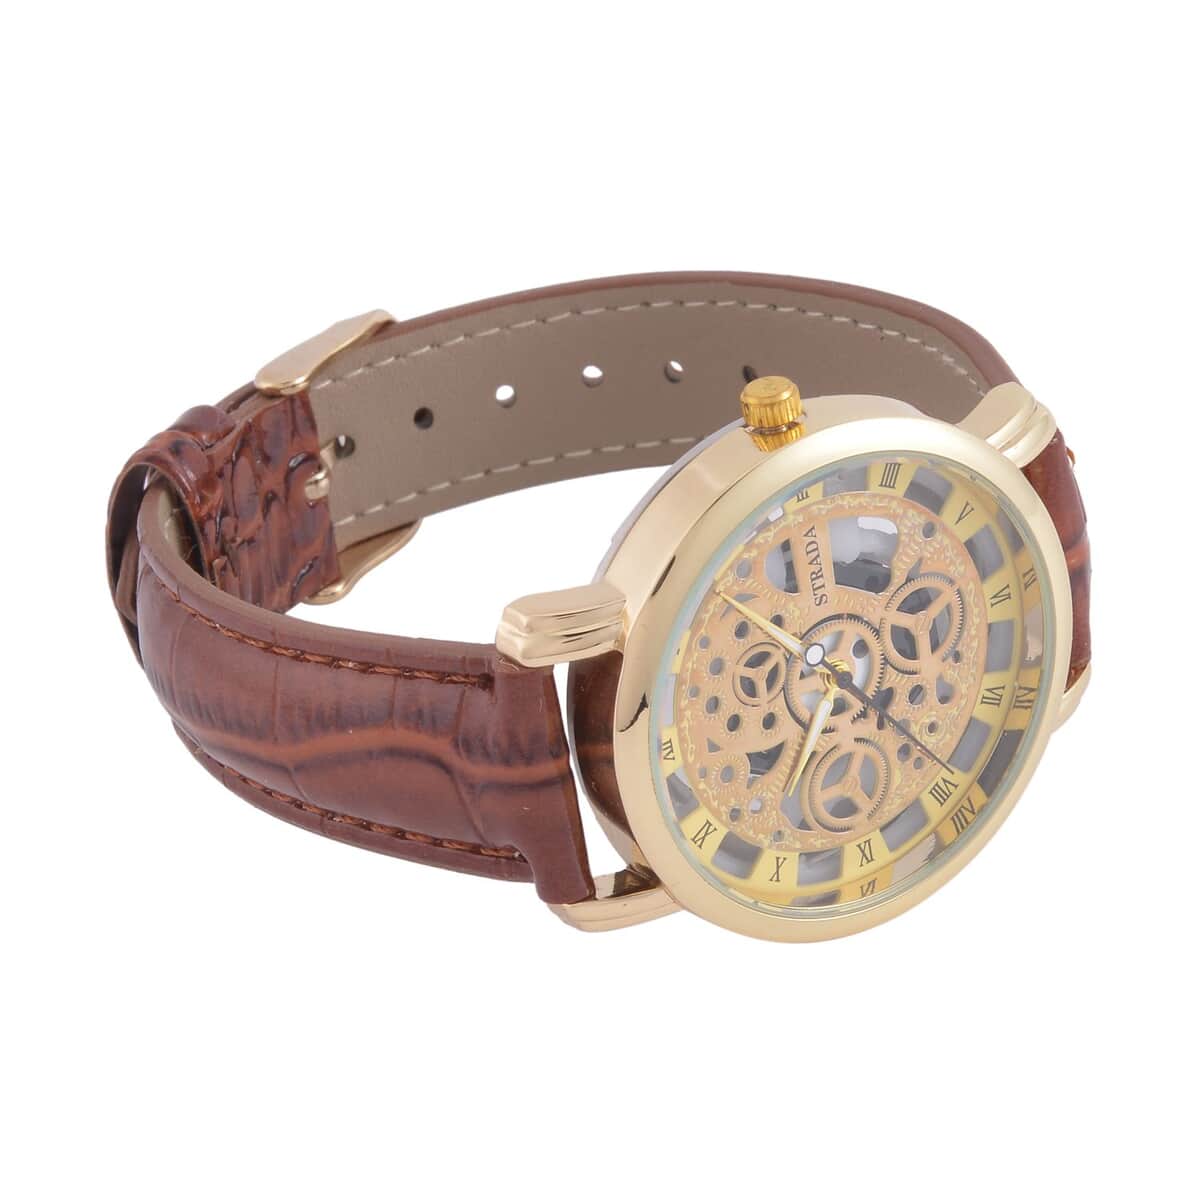 Strada Japanese Movement Skeleton Dial Watch with Brown Faux Leather Strap (38mm) (5.50-8.0Inches) image number 4